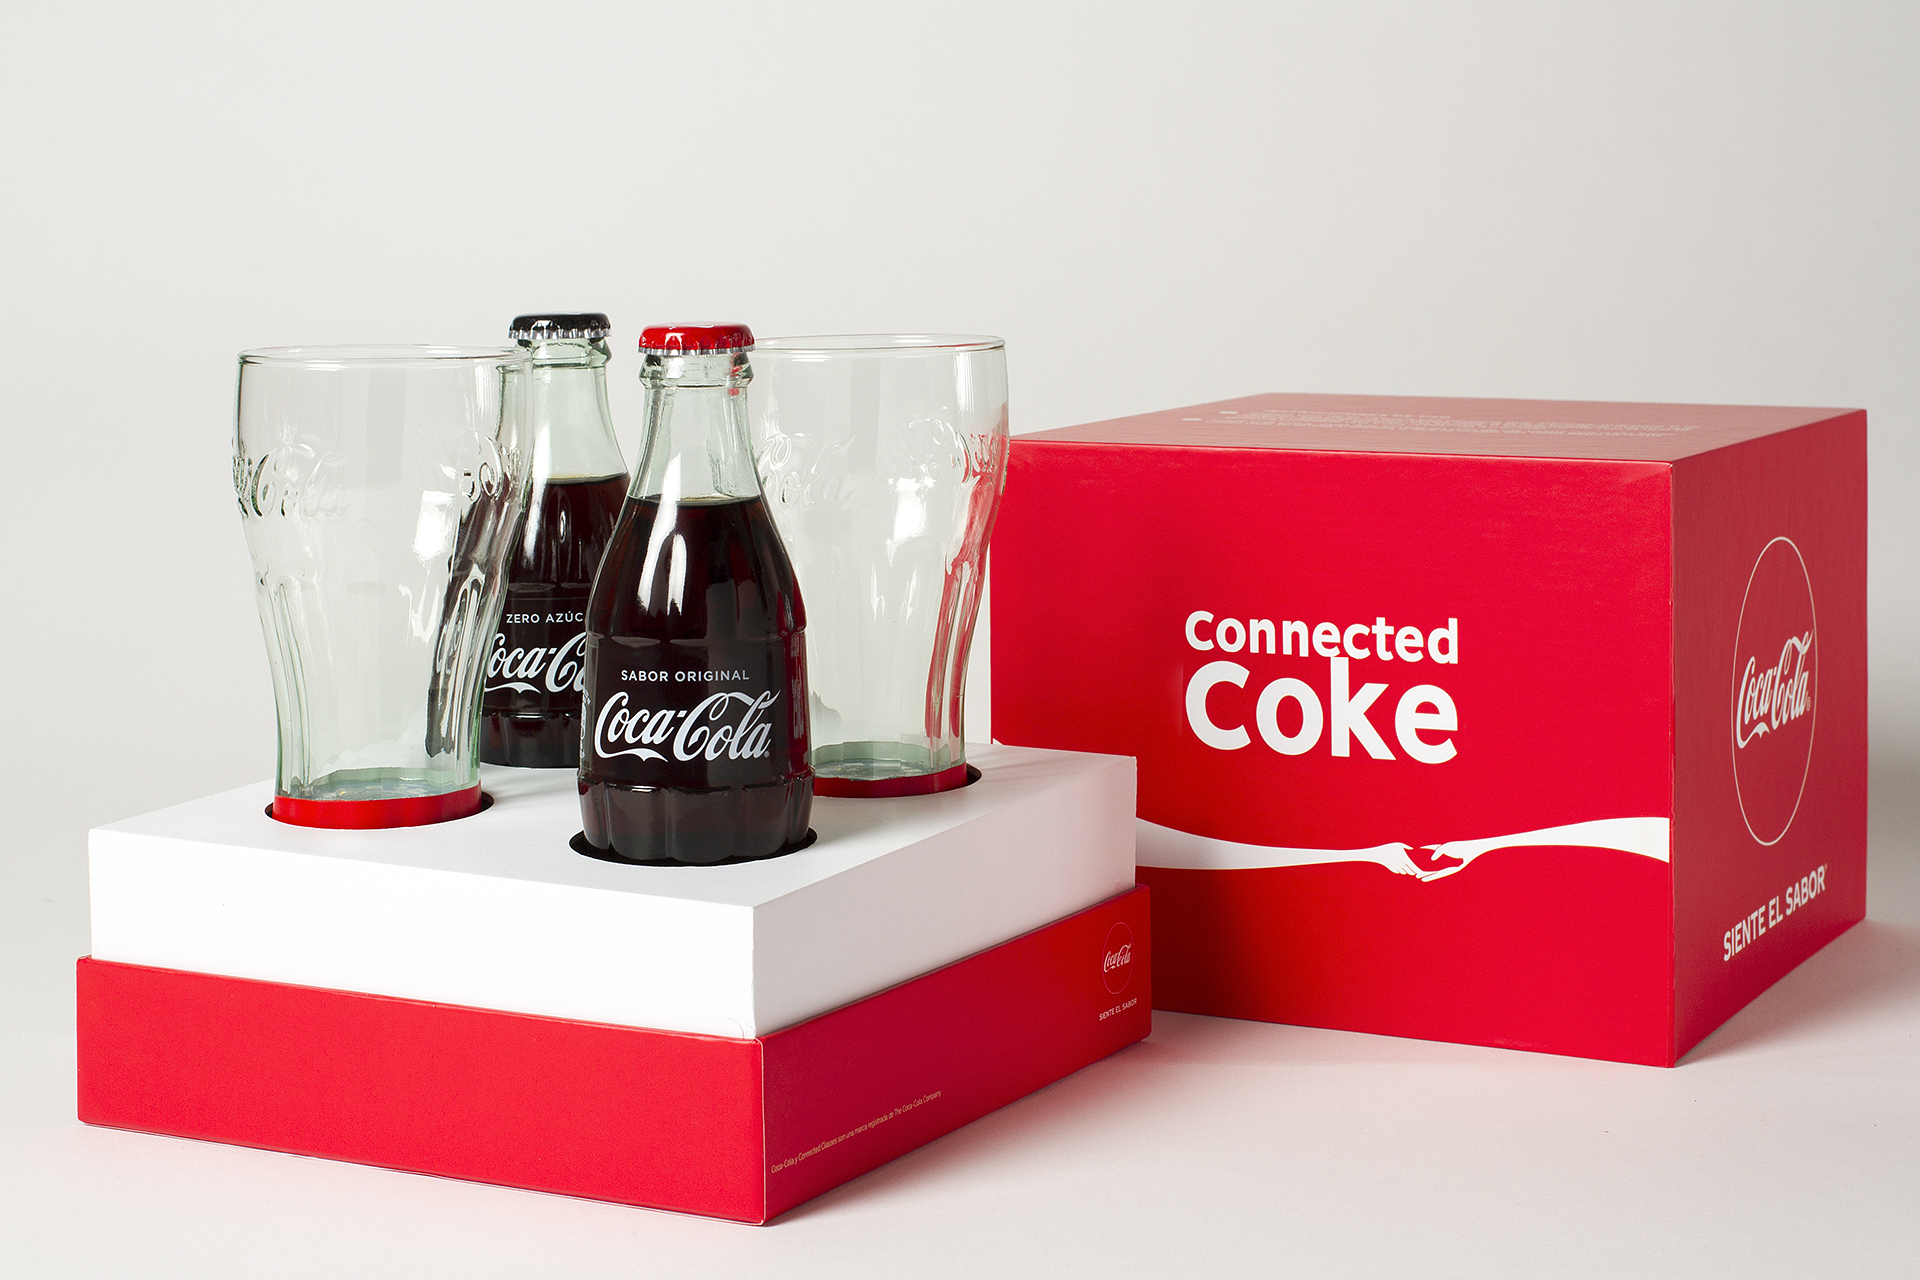 Connected Coke by Andtonic - Creative Work - $i